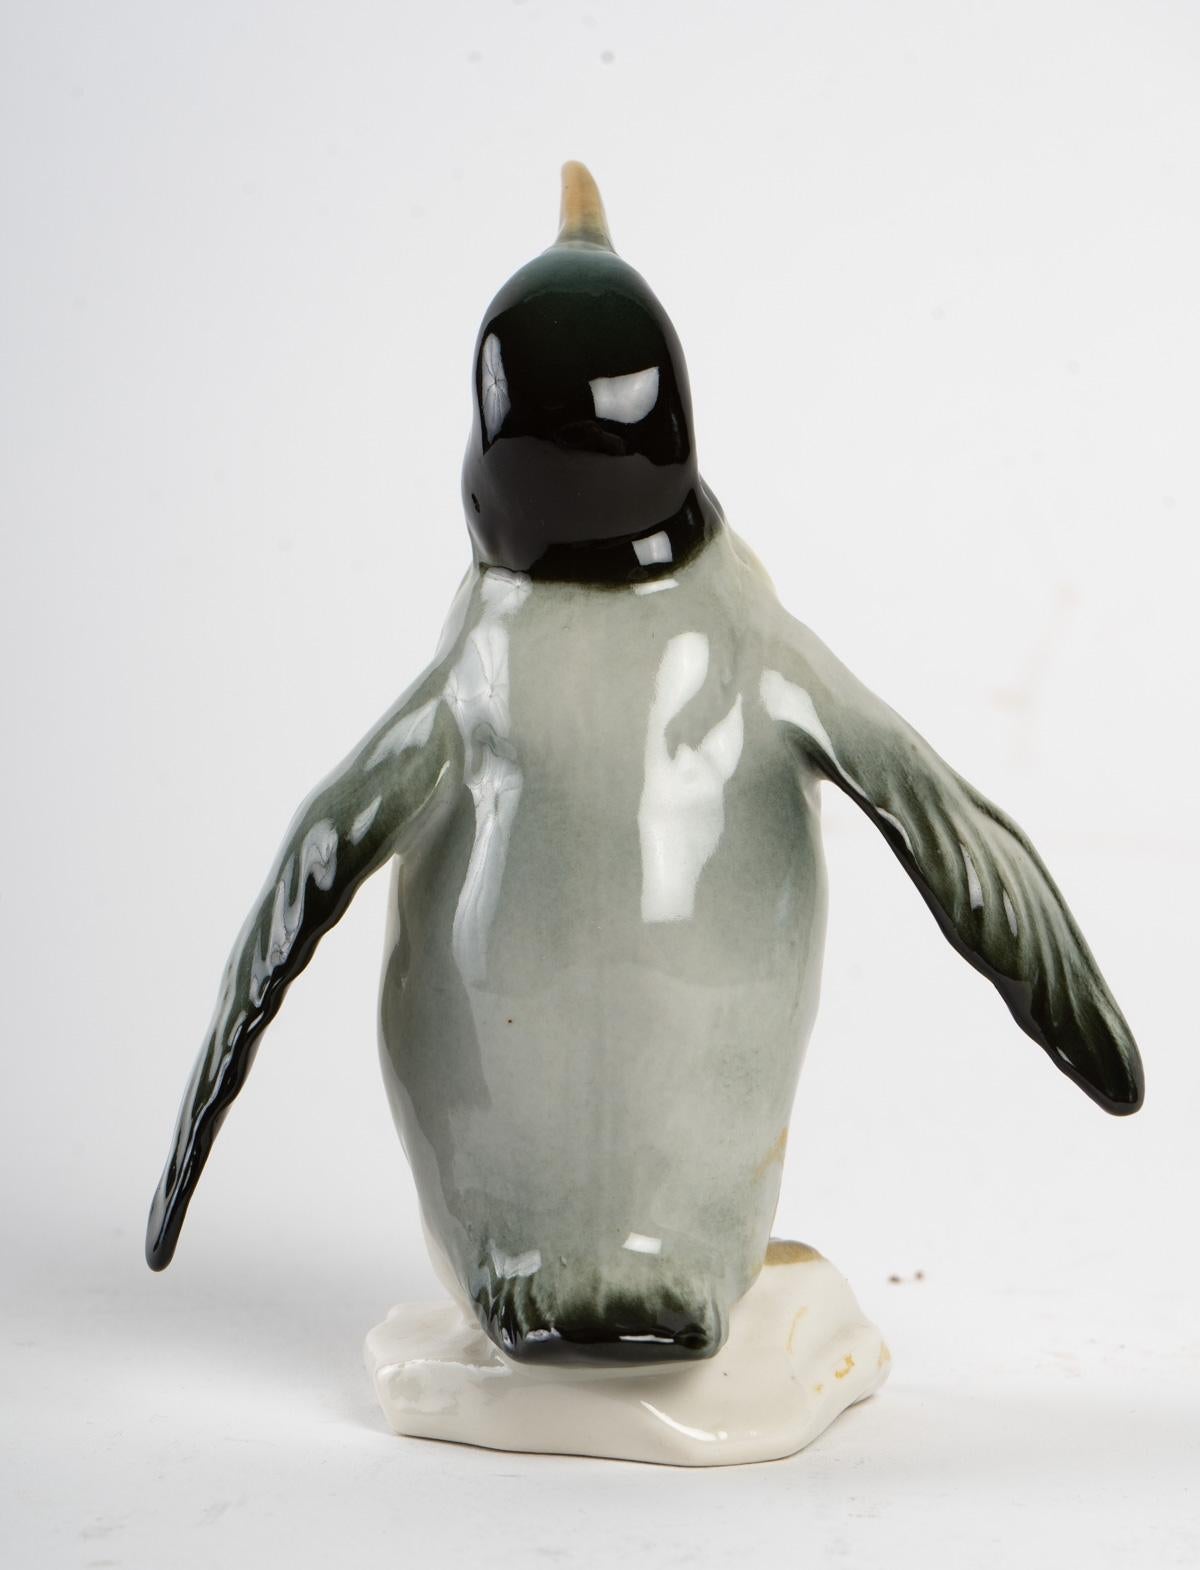 Penguin Karl Ens rare
German Manufacture Karl Ens, Porcelain, 20th century
Perfect condition
Measures: Height approx. 12cm
Width about 10cm from wing tip to wing tip.